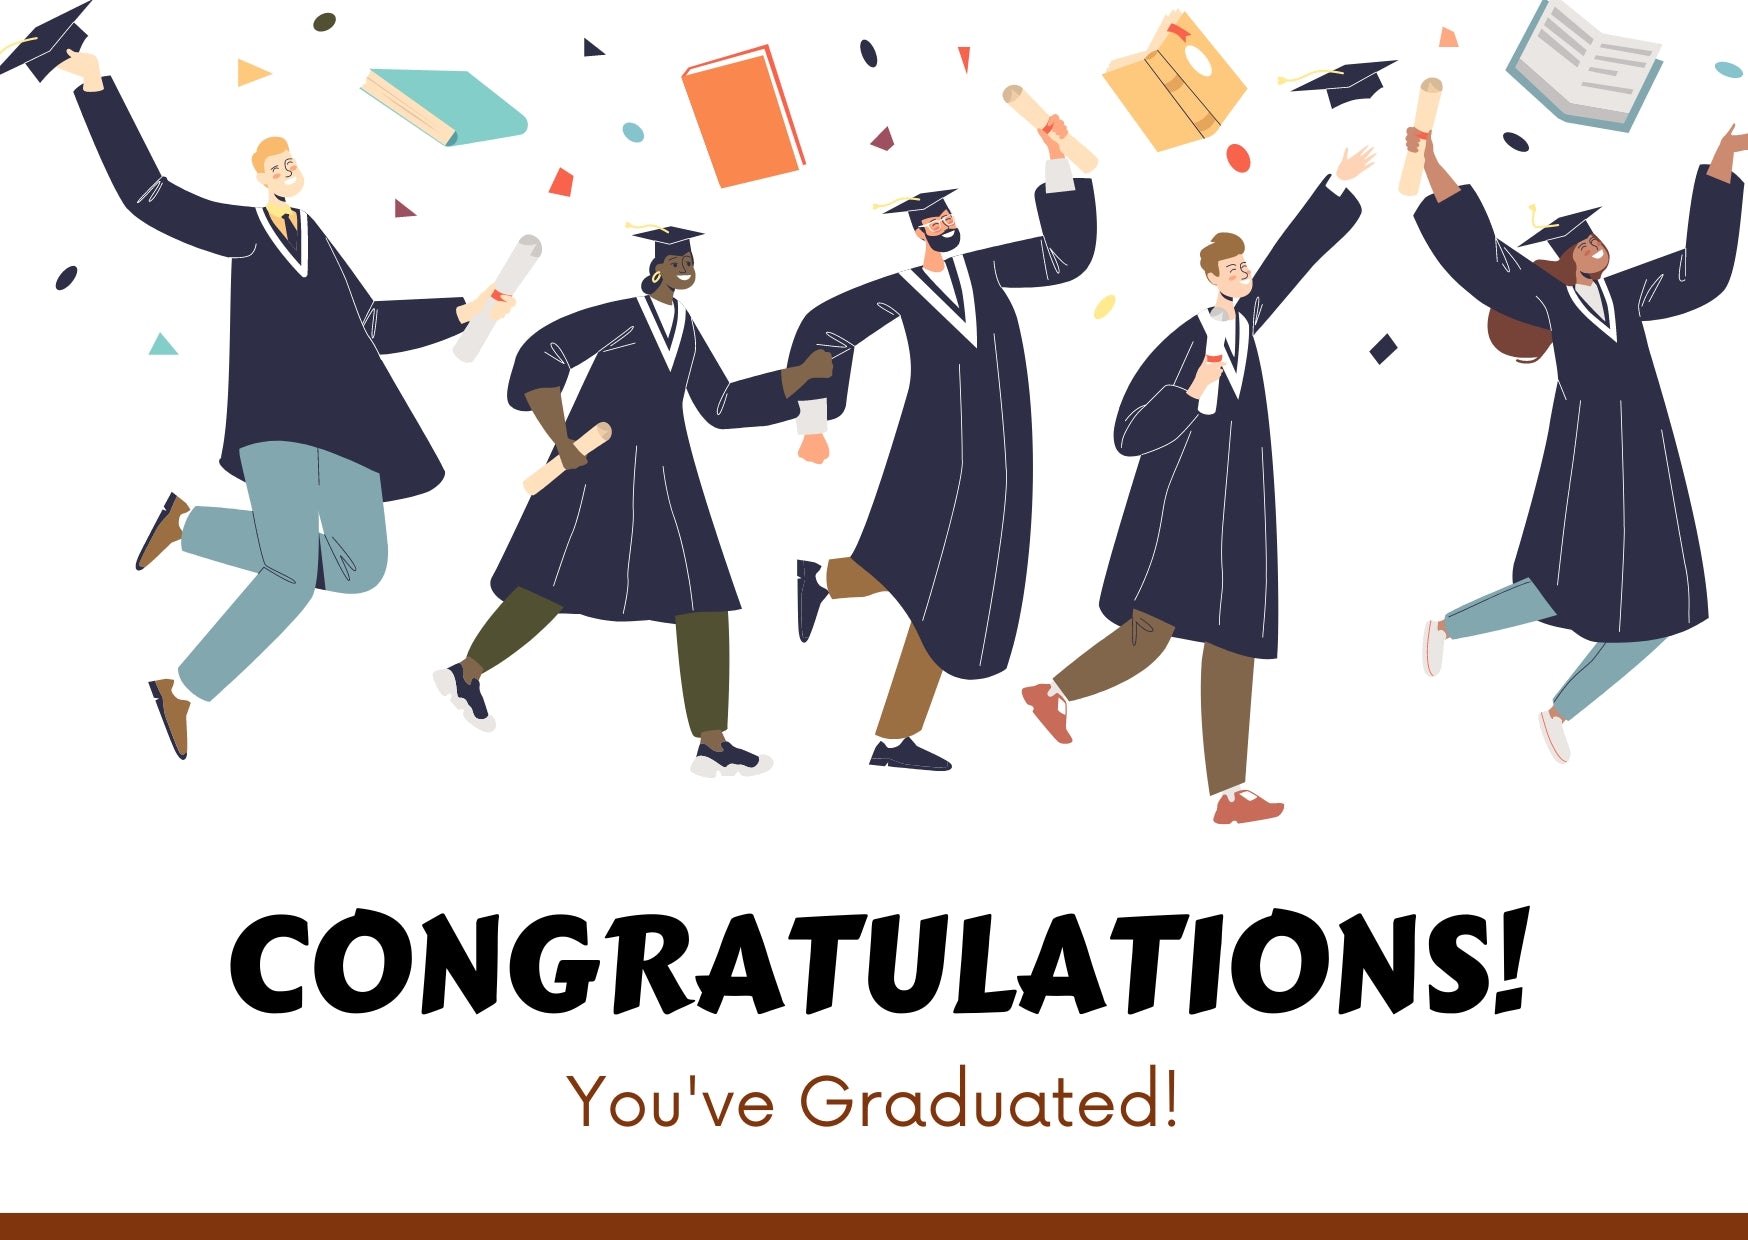 Illustration of diverse graduates tossing caps in the air with books and diplomas, featuring the Graduation Congratulations Messages.